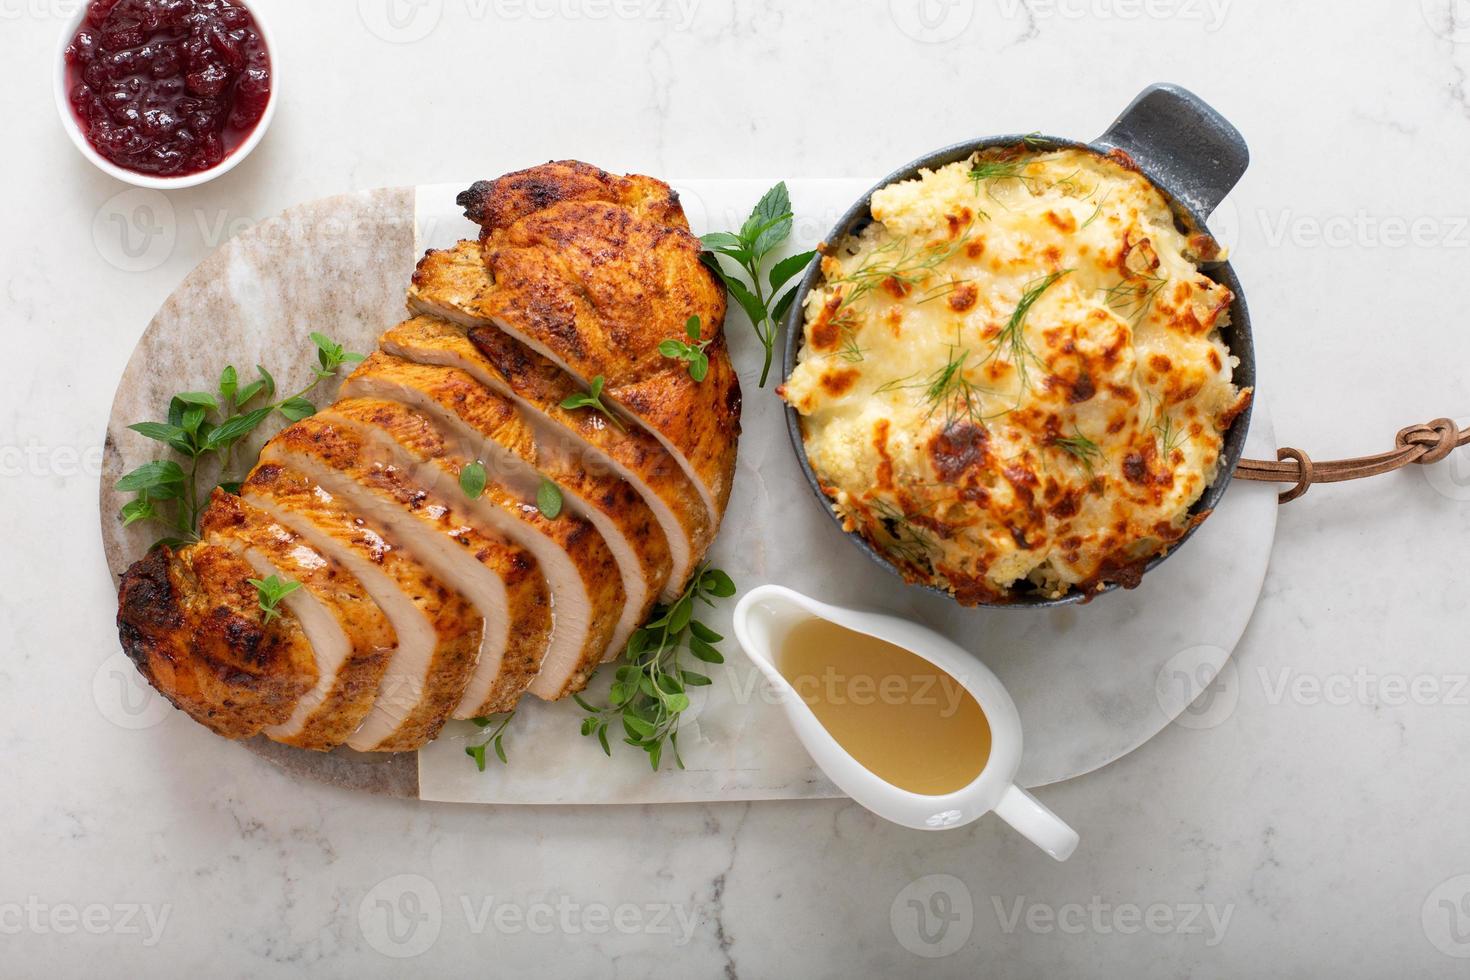 Roasted turkey breast sliced on a plate for holidays photo